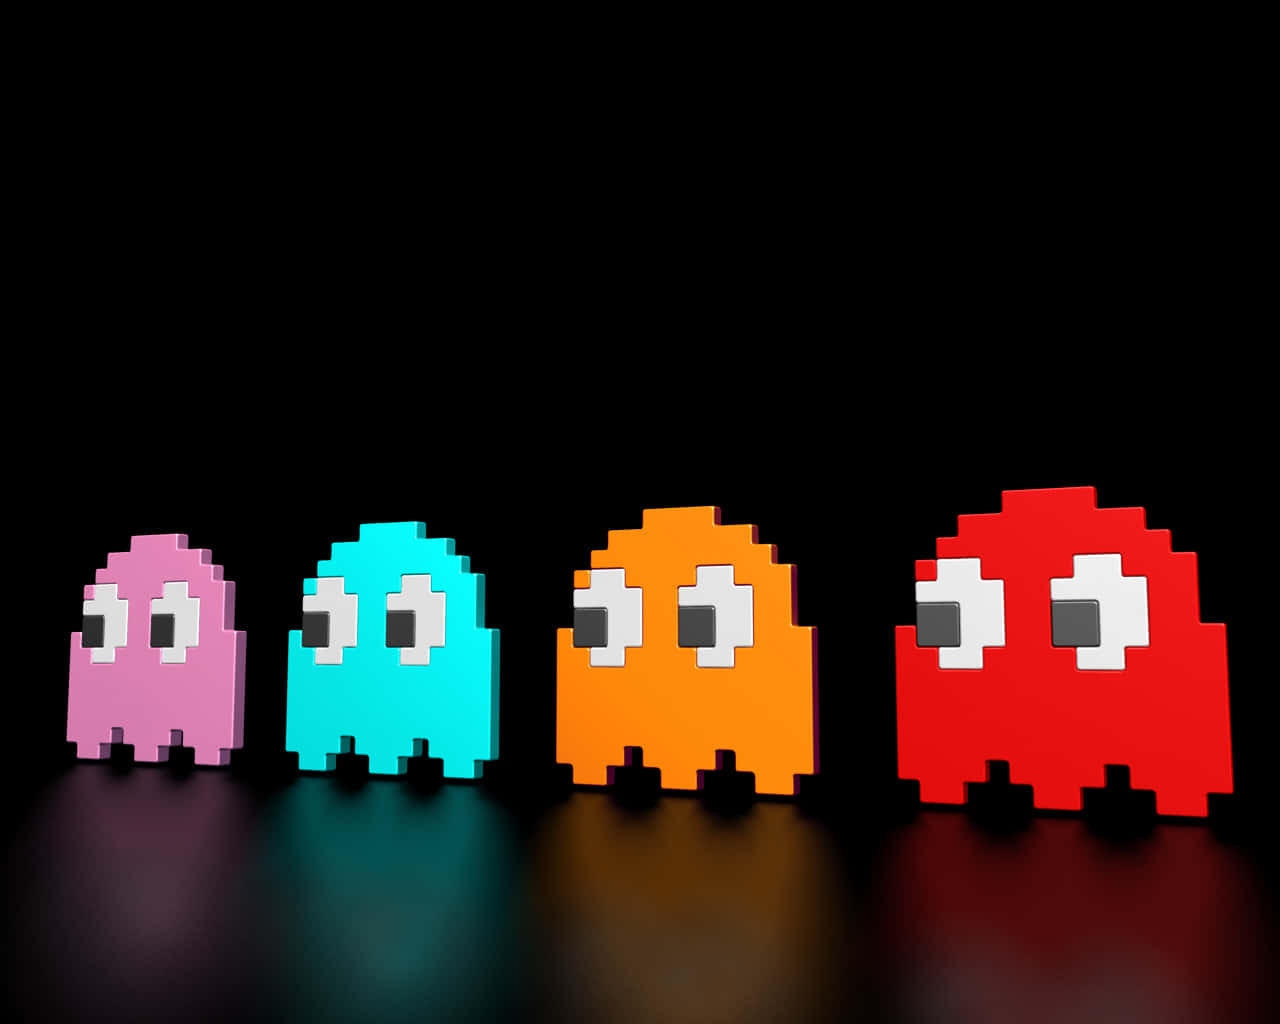 Classic Pac-Man Arcade Game Background